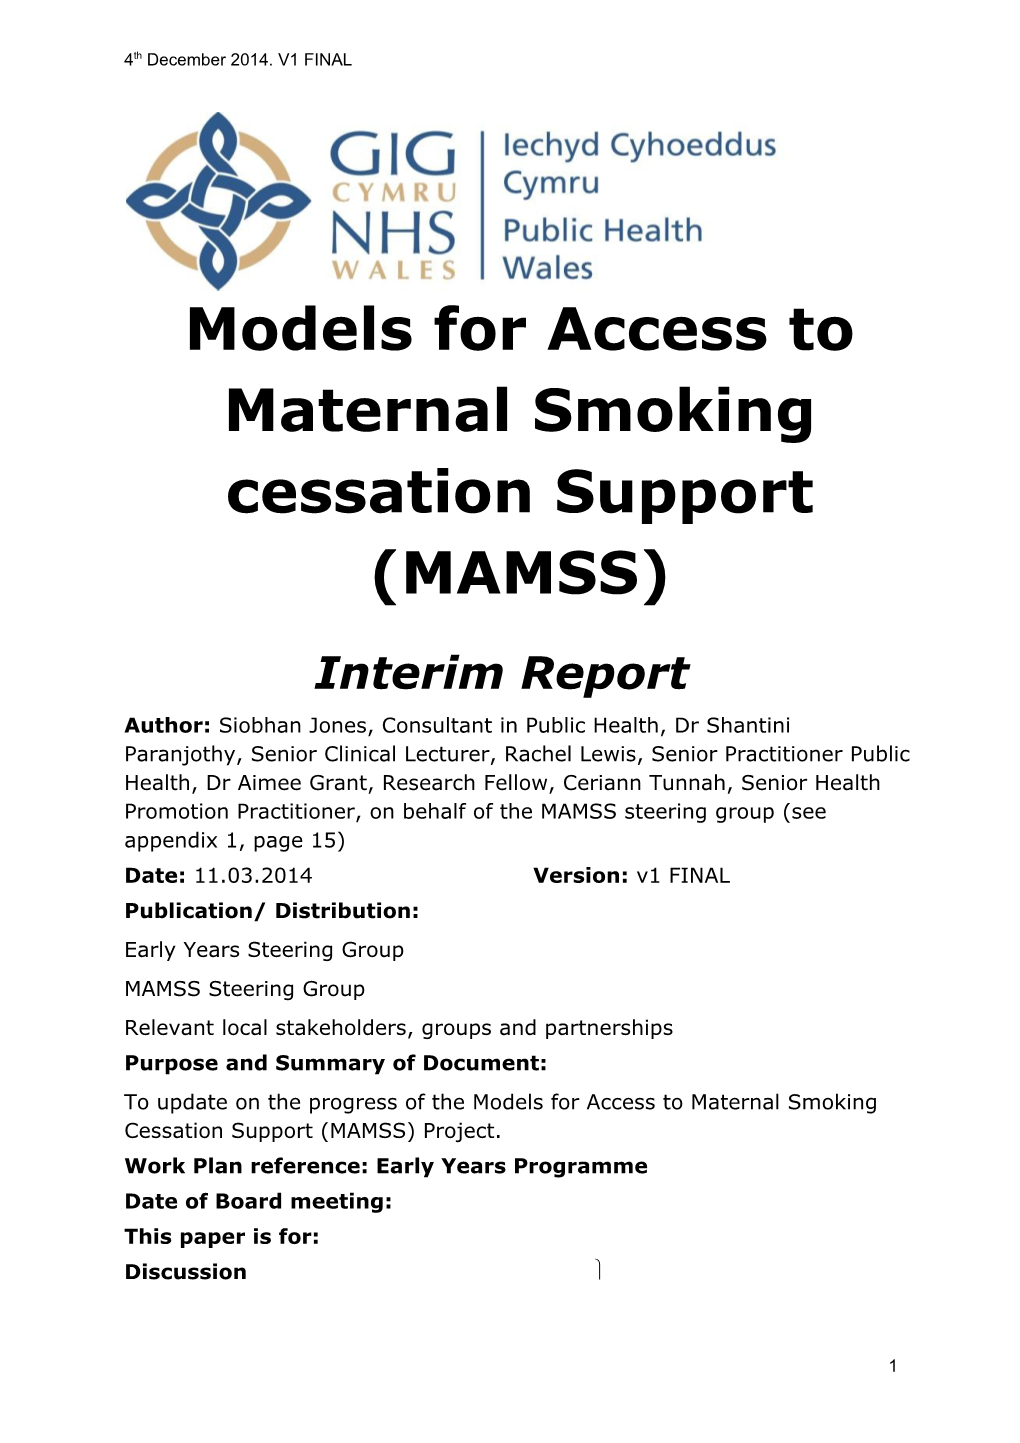 Maternal Smoking Is a Key Determinant of Poor Outcomes for Mothers, Babies and Children